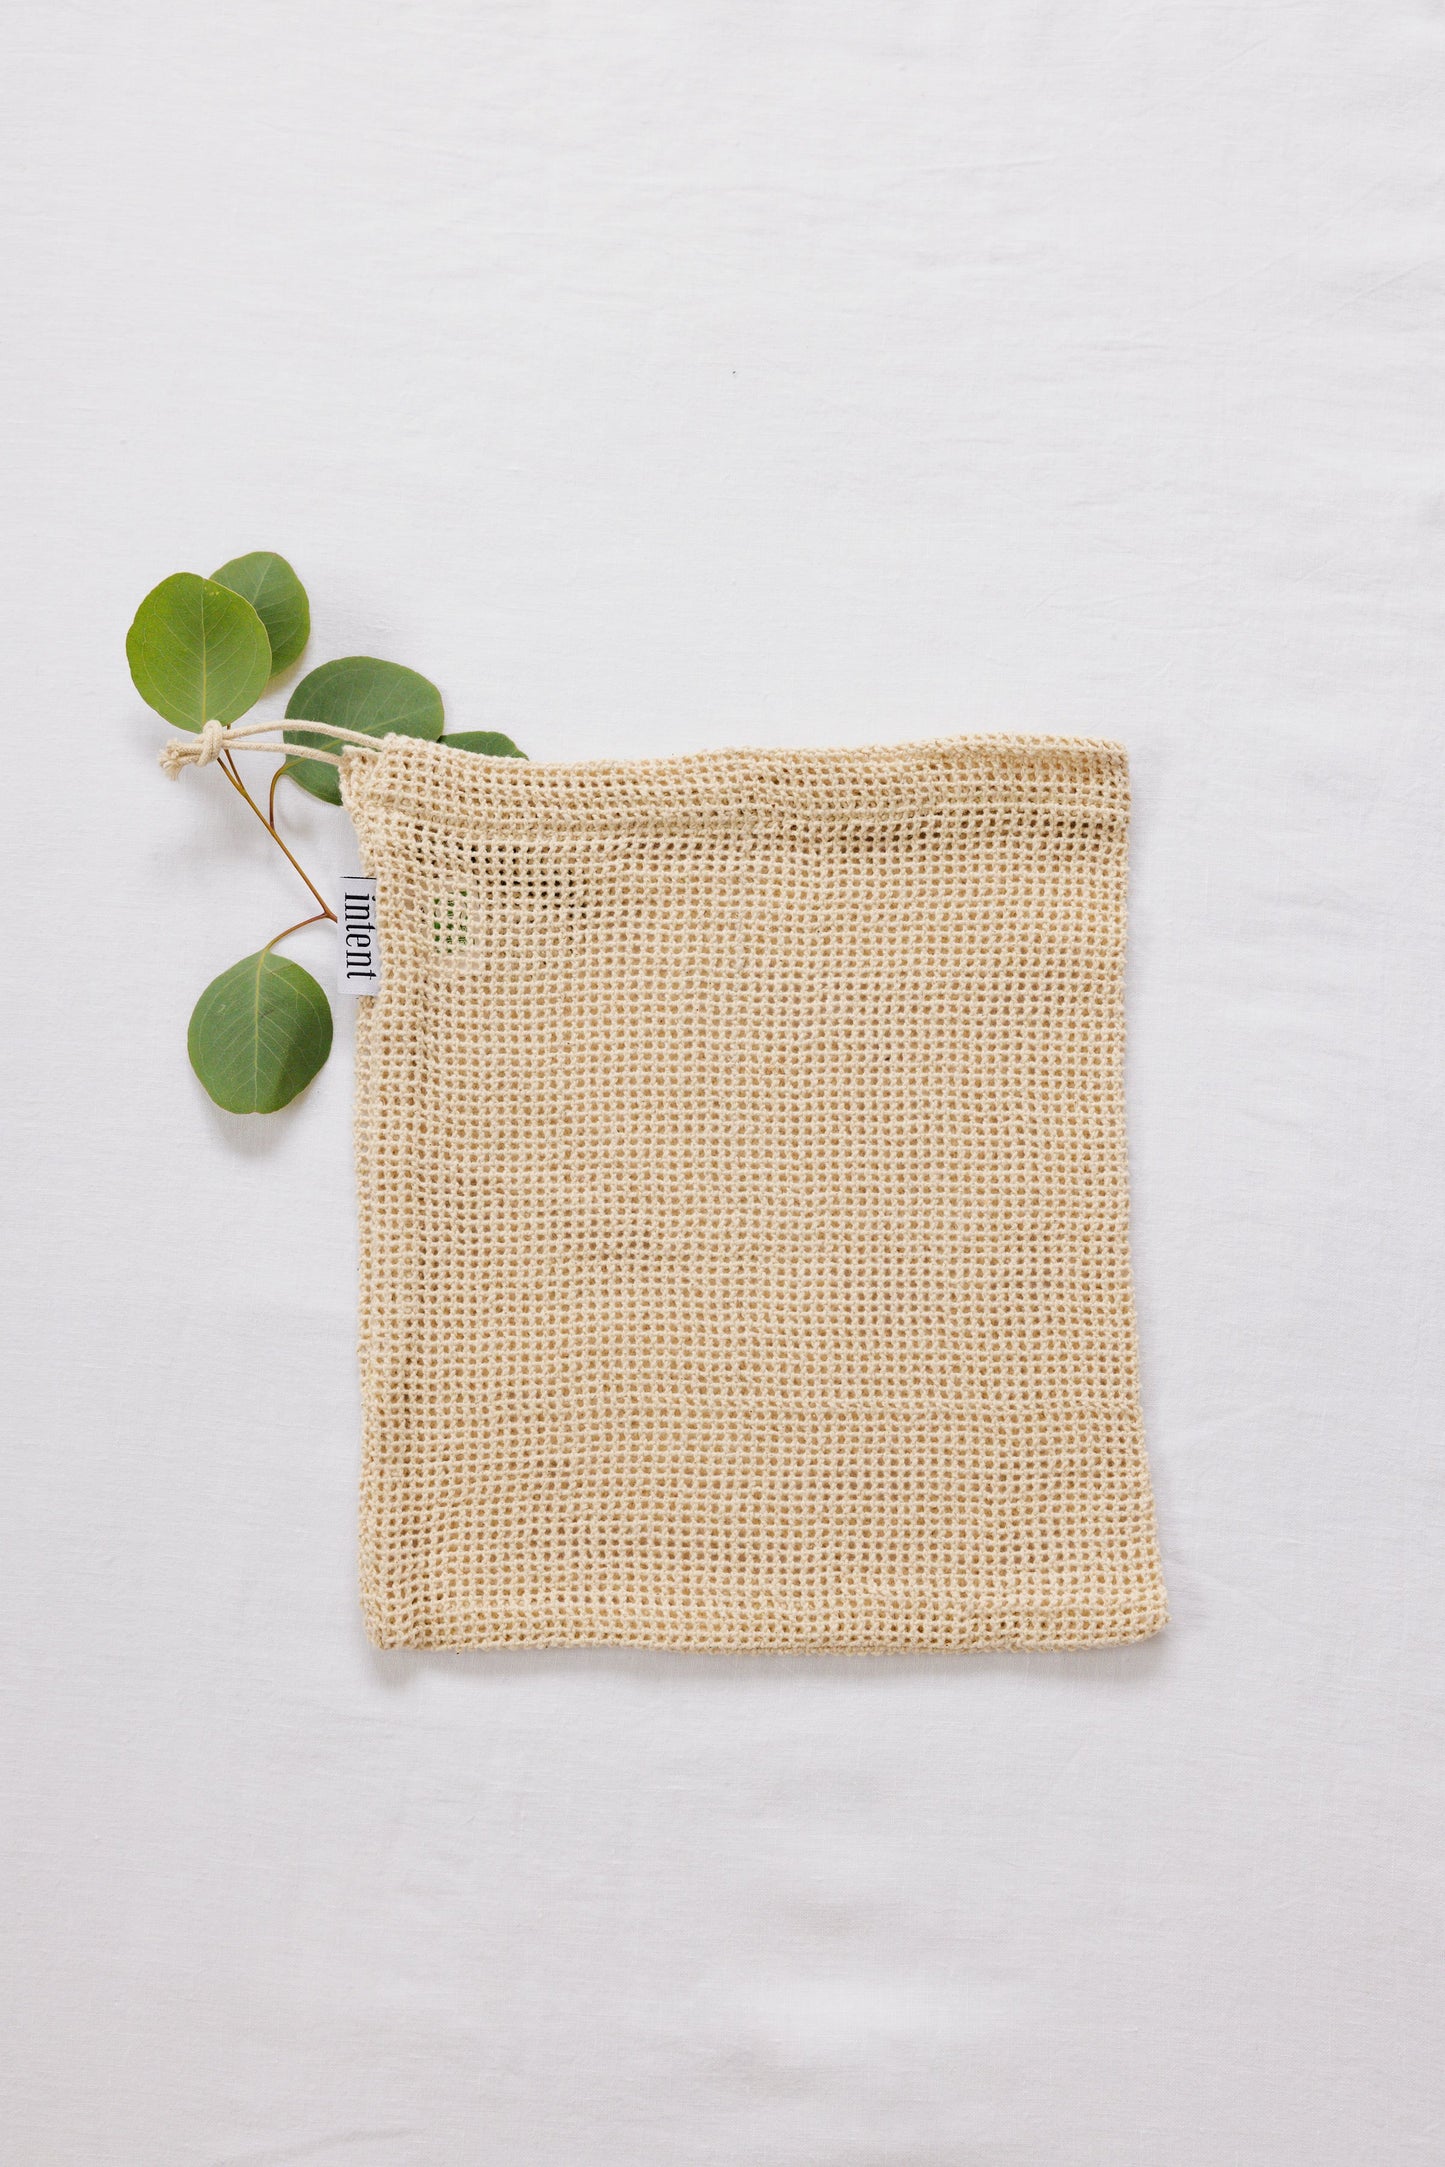 organic cotton and fair trade certified medium produce. bag use: great for small to medium-sized produce and fruits